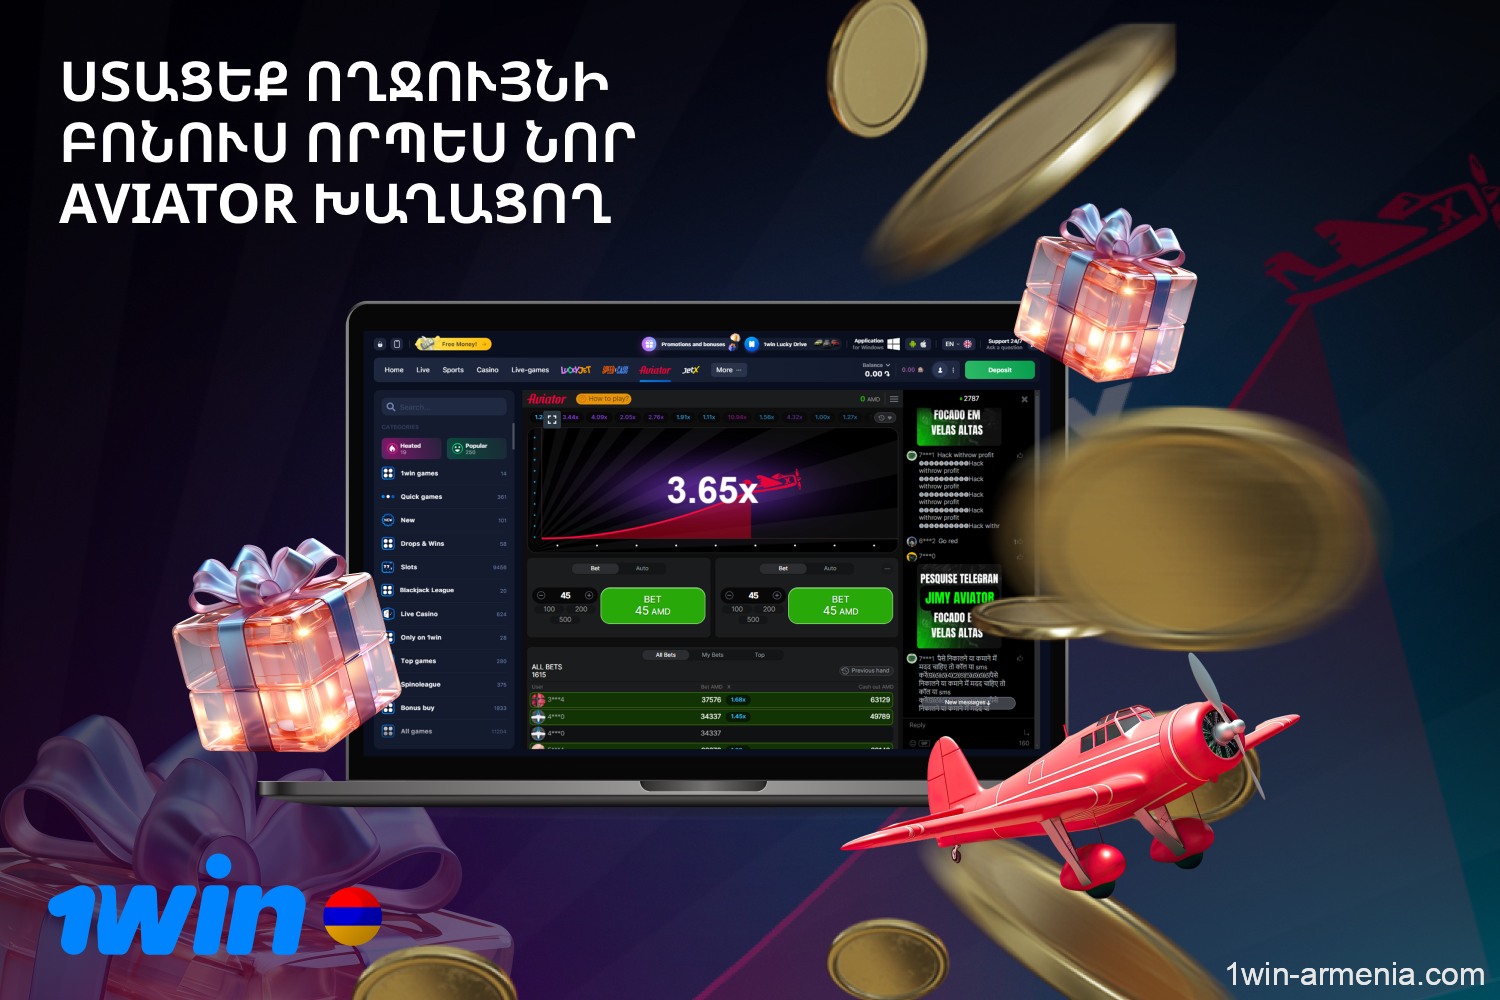 After registration, new users from Armenia can get a welcome bonus at Aviator 1win